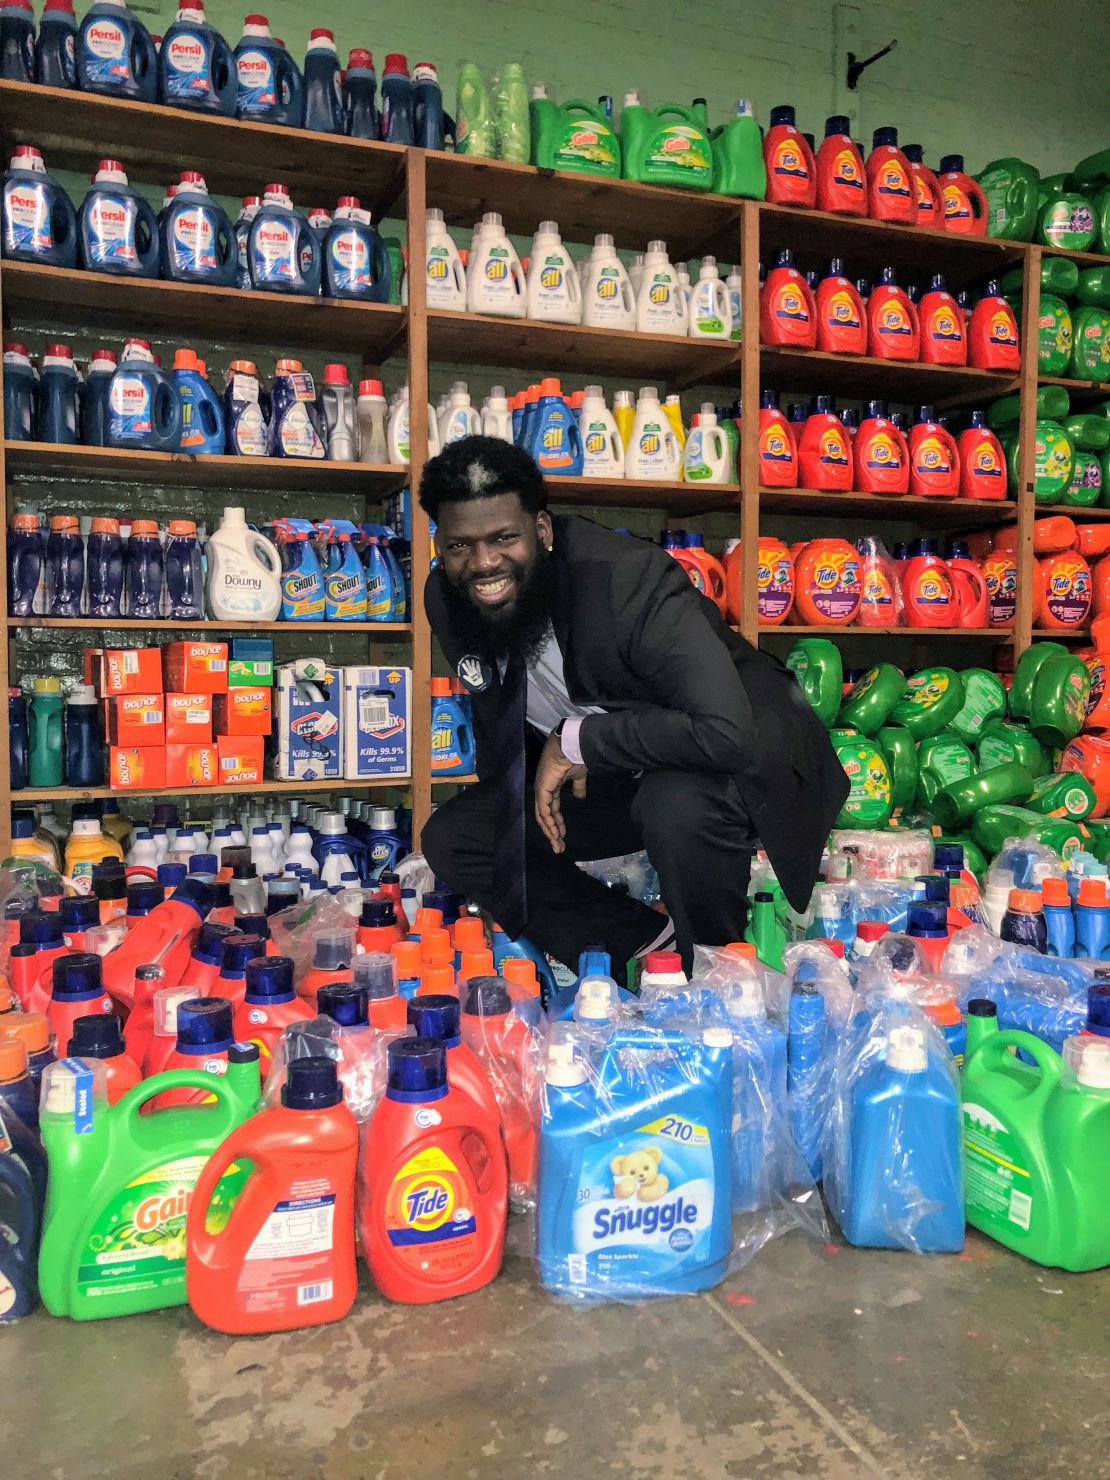 Principal Akbar Cook shows a portion of the donated detergent sent to New Jersey's West Side High School to support their free laundry room.